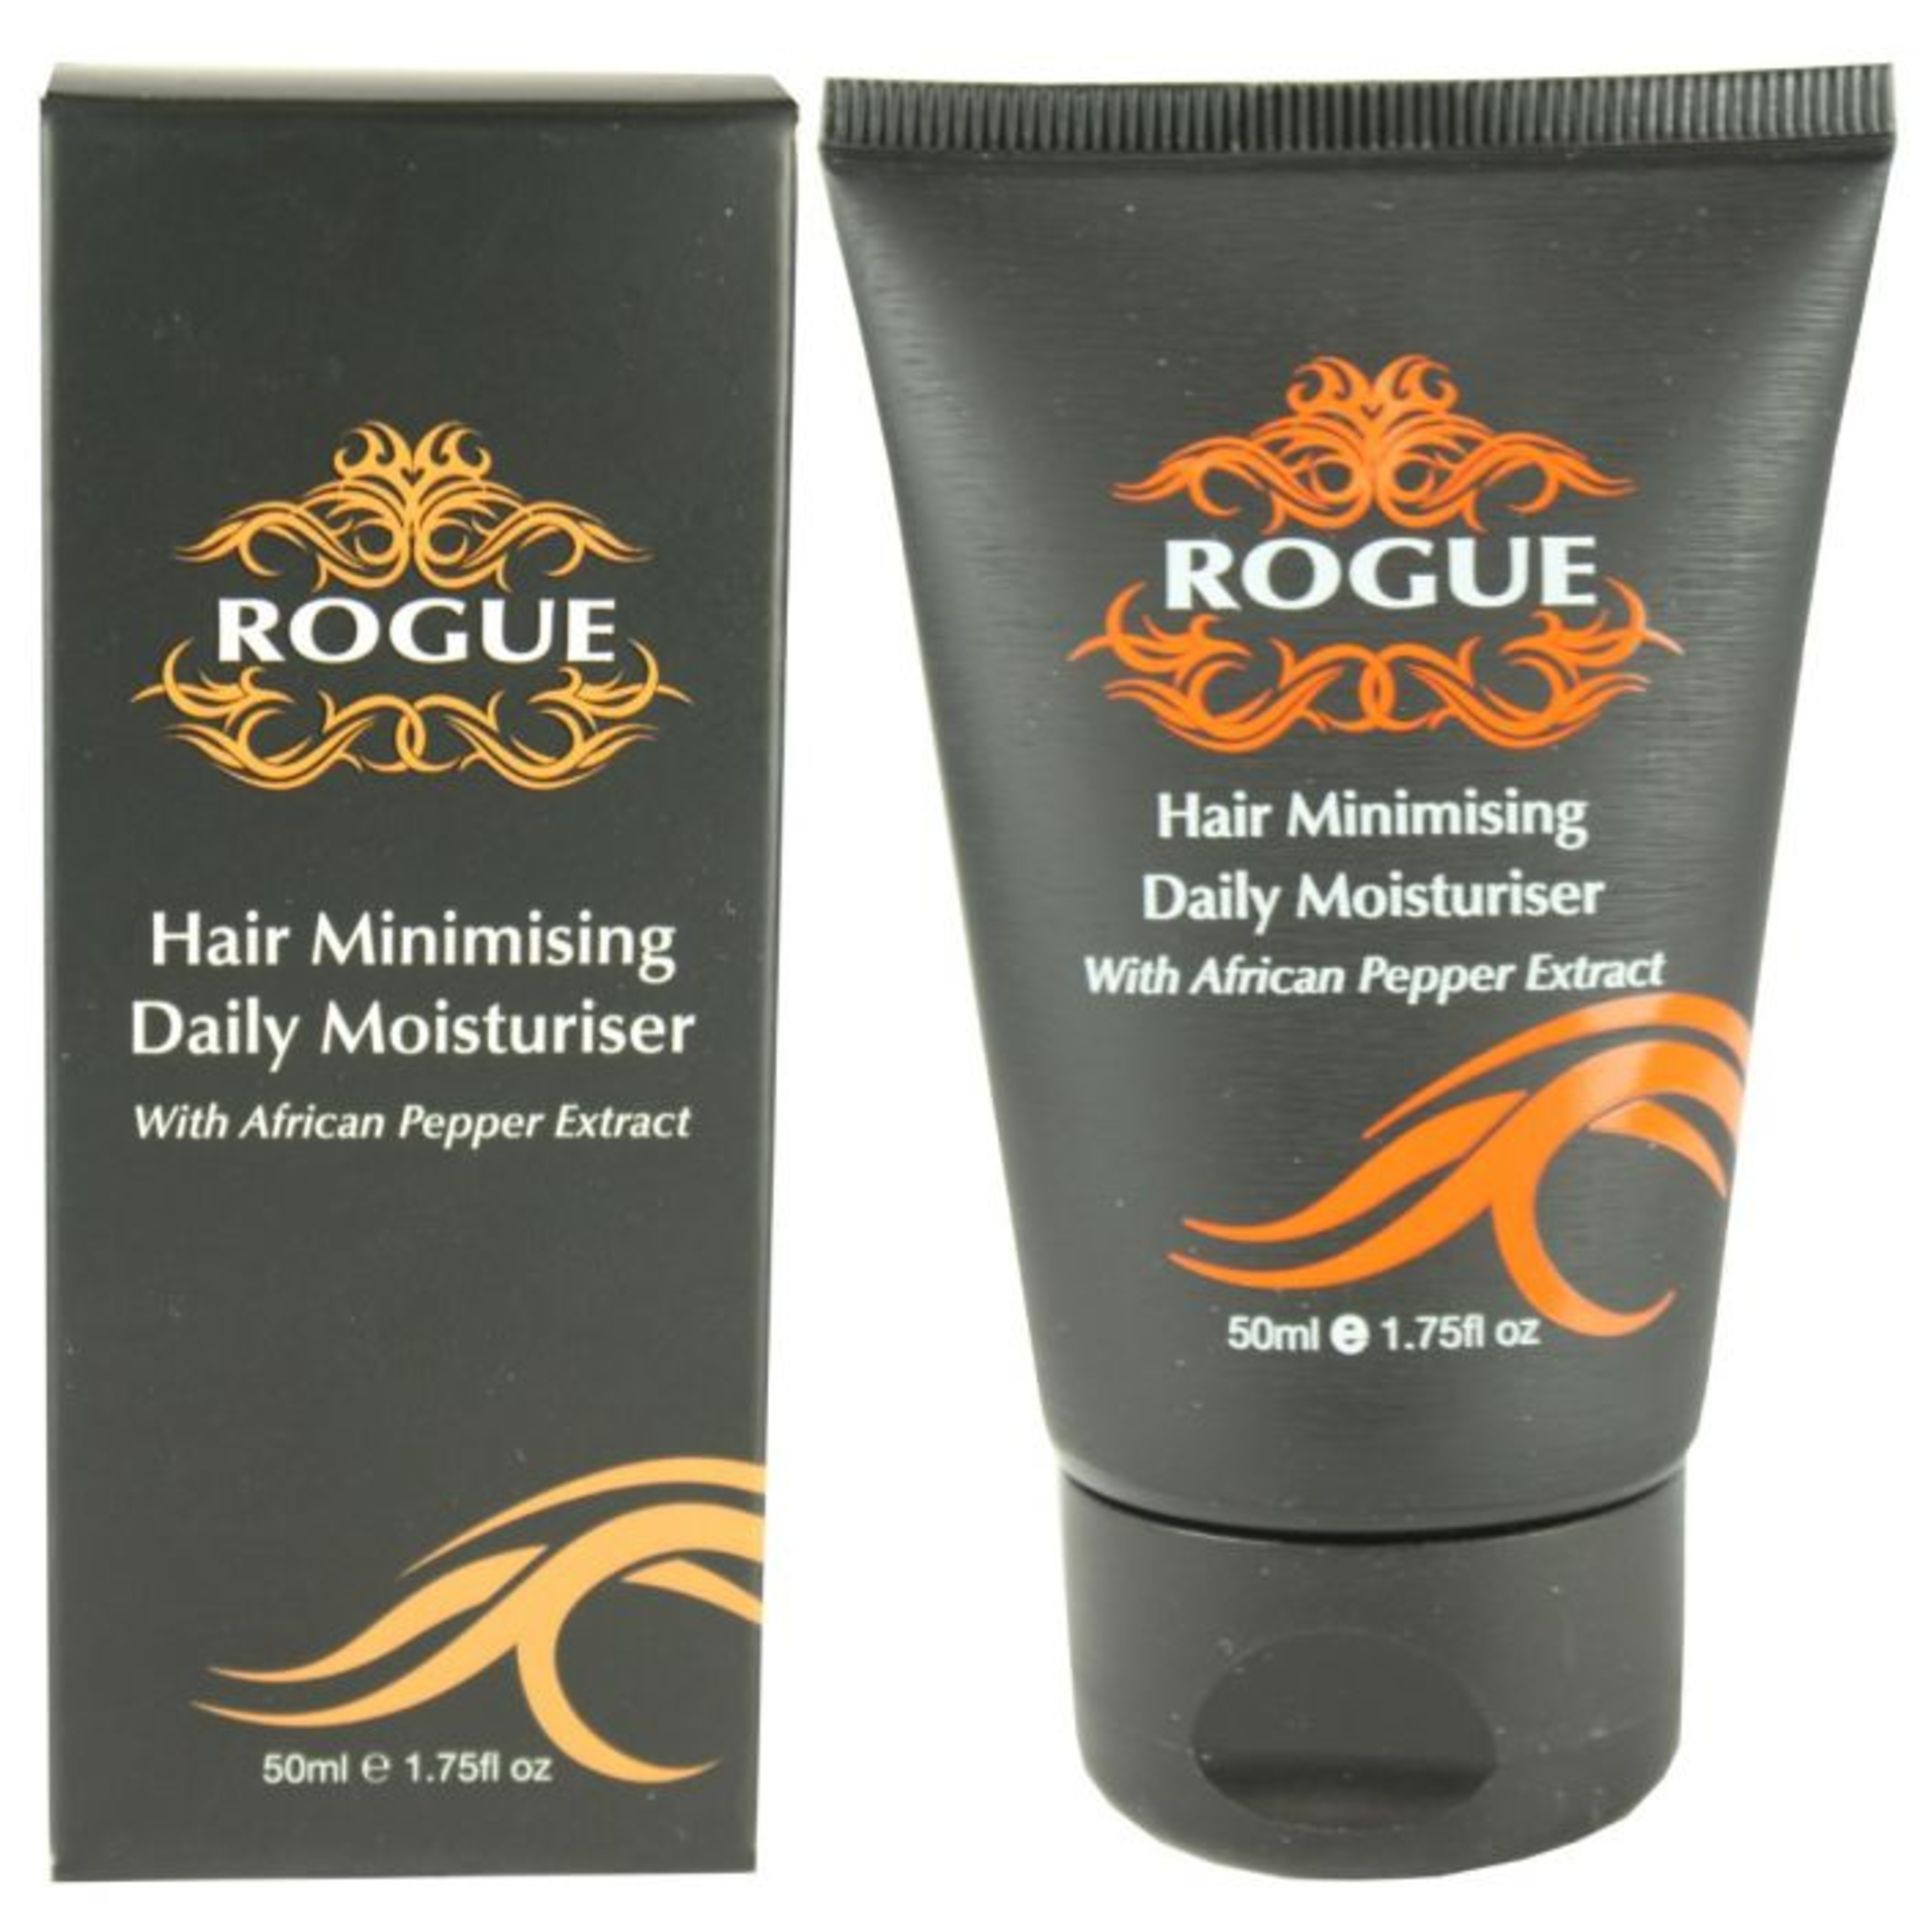 Brand New Cougar Rogue Hair Minimising Daily Moisturiser And Moulding Paste - Ebay 19.99